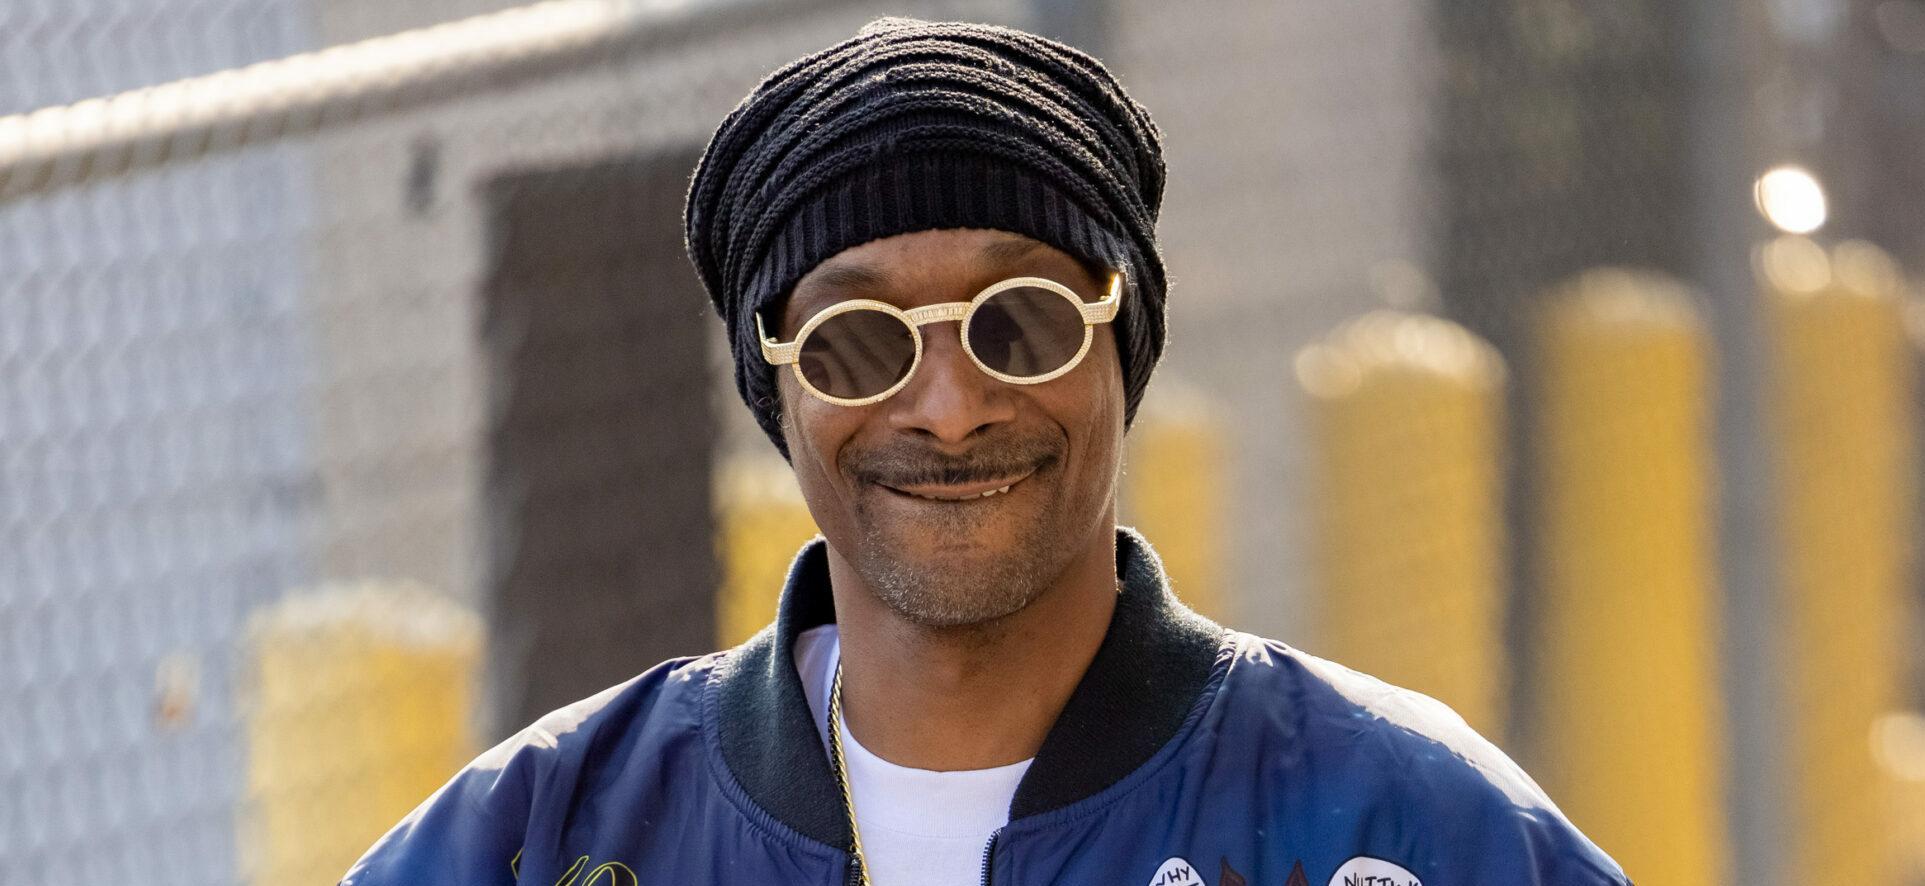 Snoop Dogg is seen at Jimmy Kimmel Live in LA